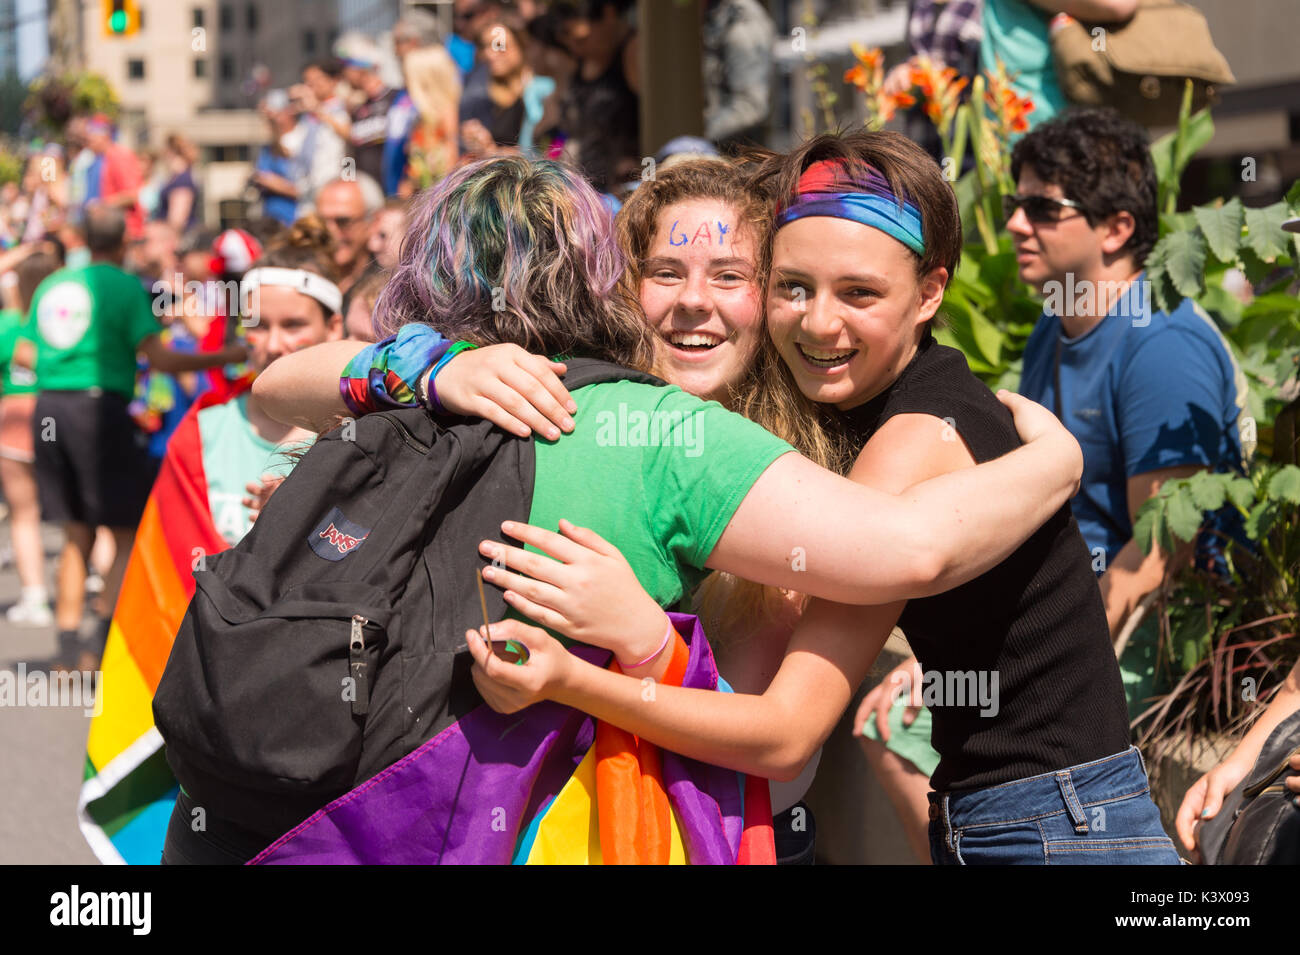 Montreal, CANADA - 20 August 2017: 3 people hugging each other at Montreal Gay Pride Parade Stock Photo